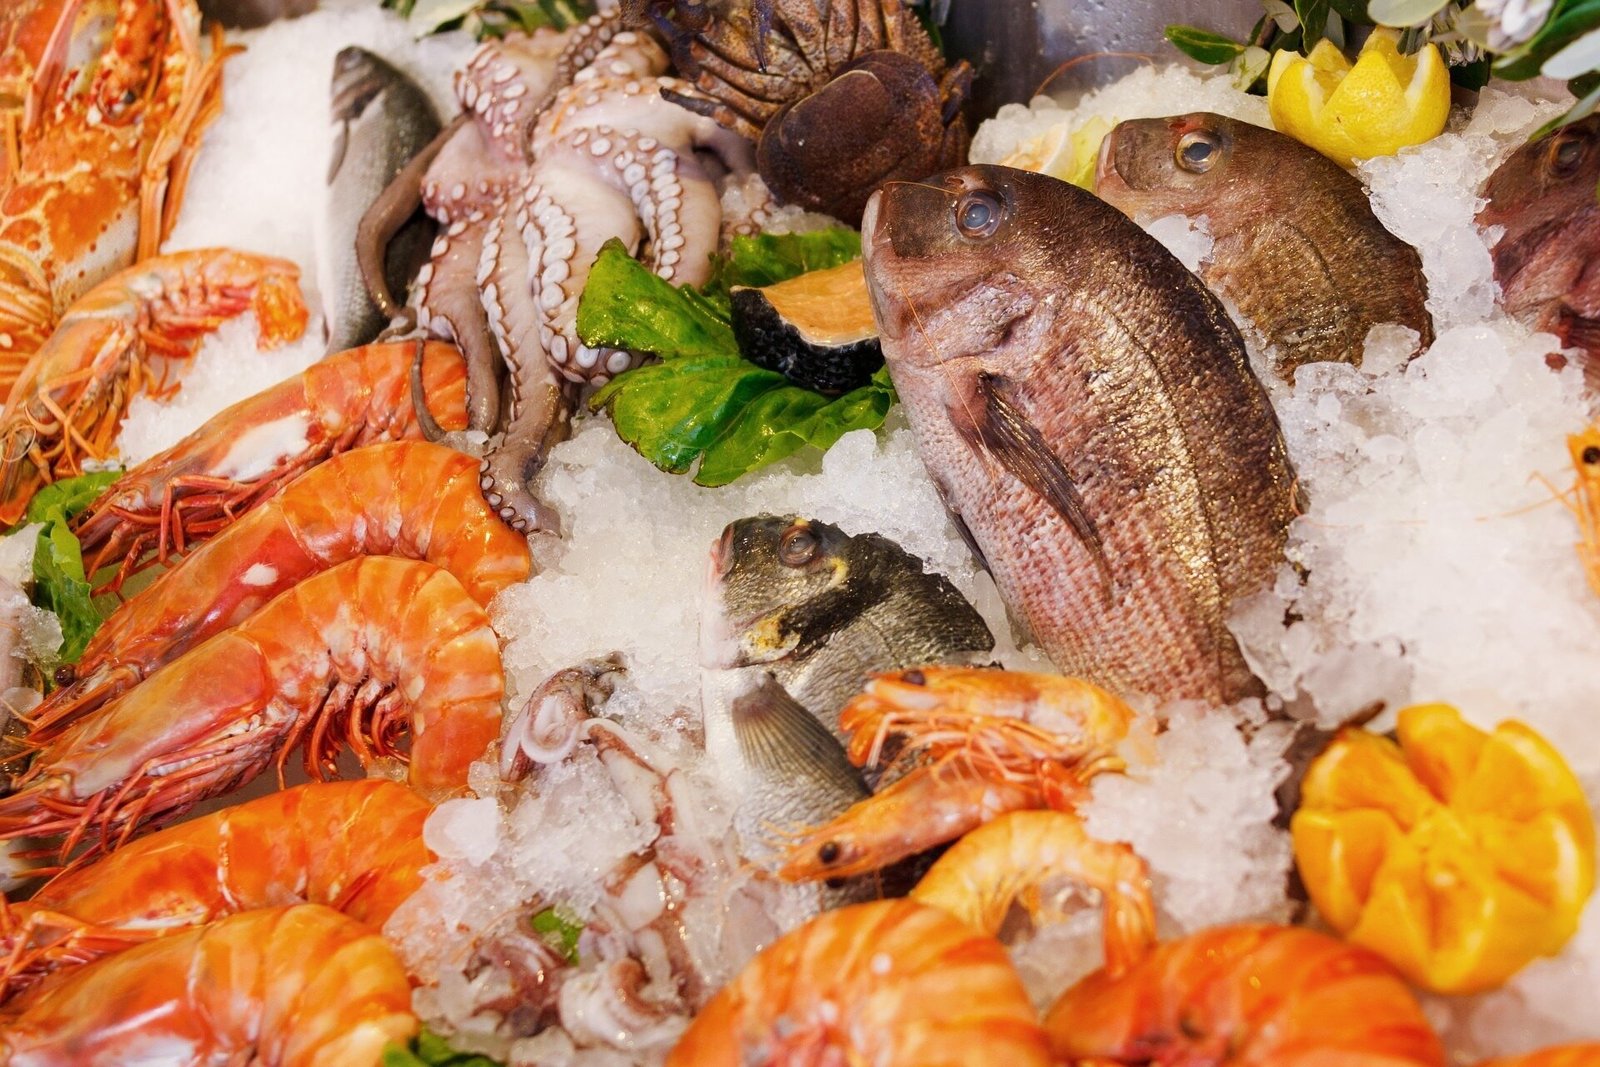 PFAS exposure from high-seafood diets may be underestimated, finds study